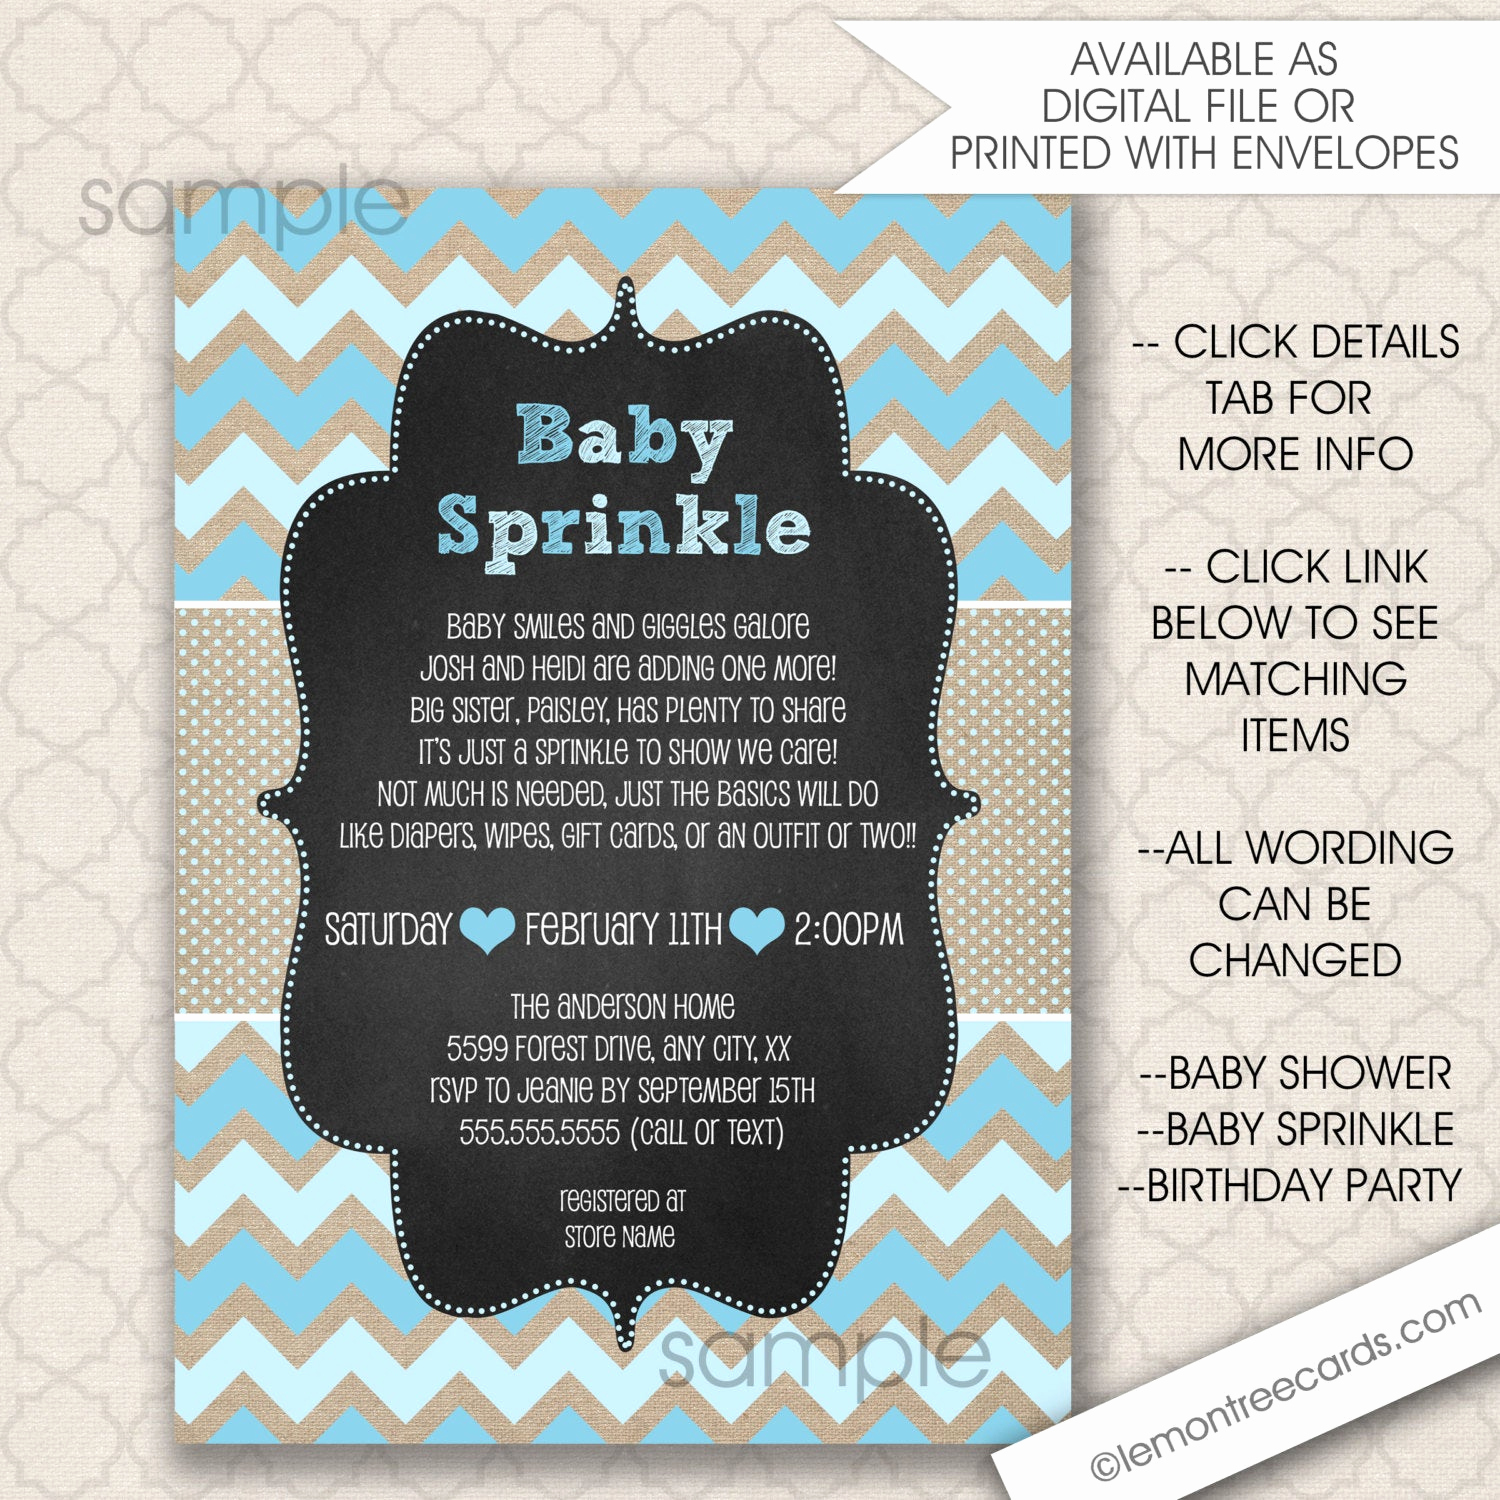 Free Baby Sprinkle Invitation Templates Lovely Rustic Baby Sprinkle Invitations Free Shipping Boy Baby